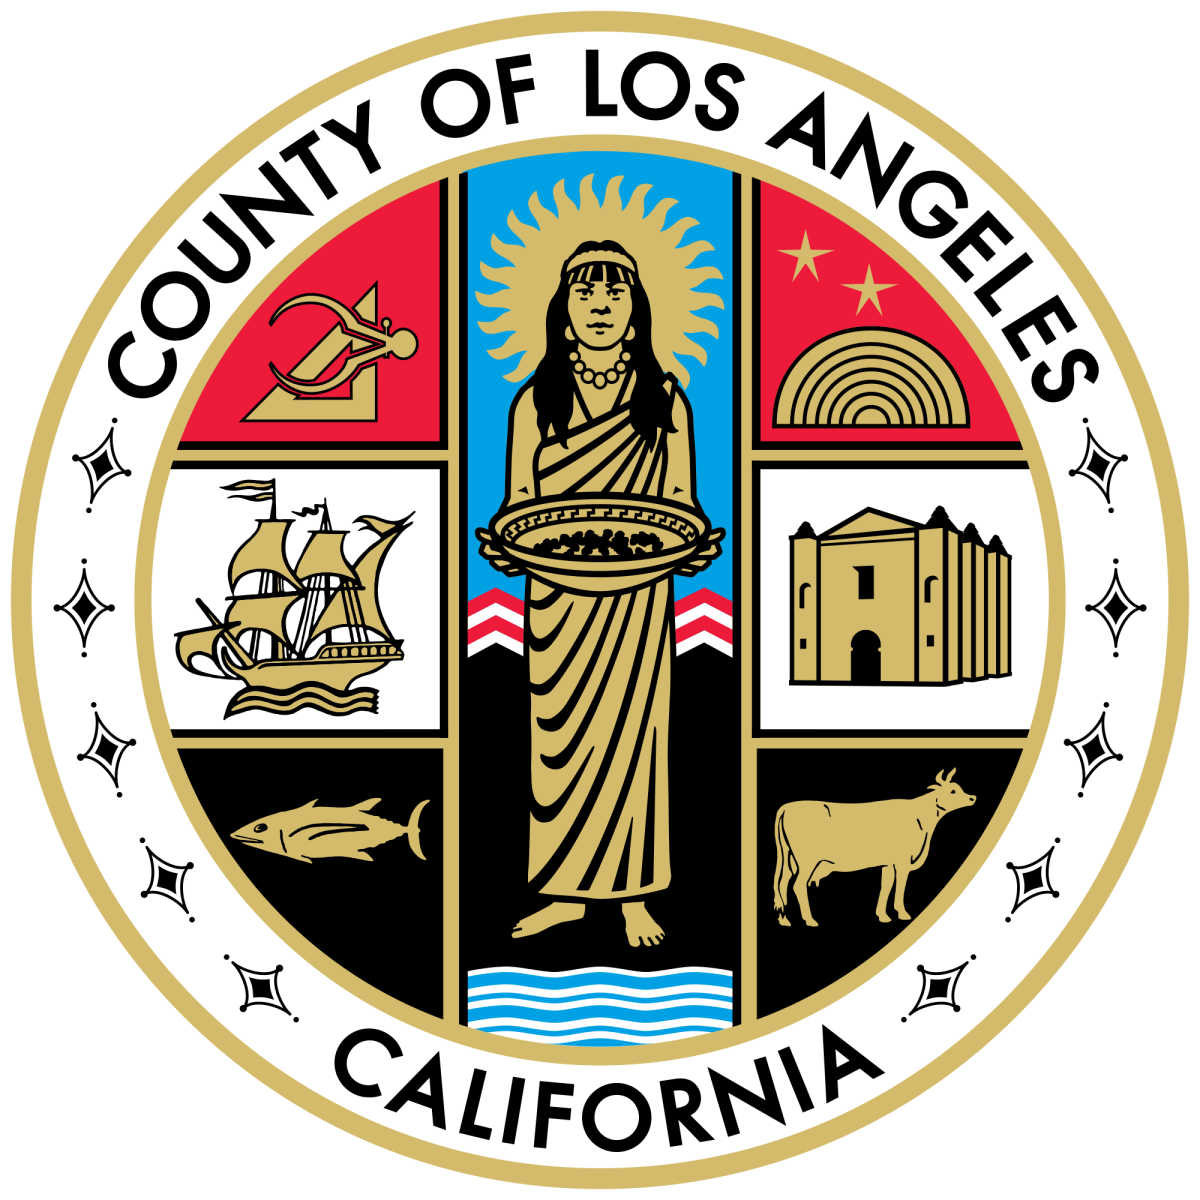 1200px-Seal_of_Los_Angeles_County,_California.svg